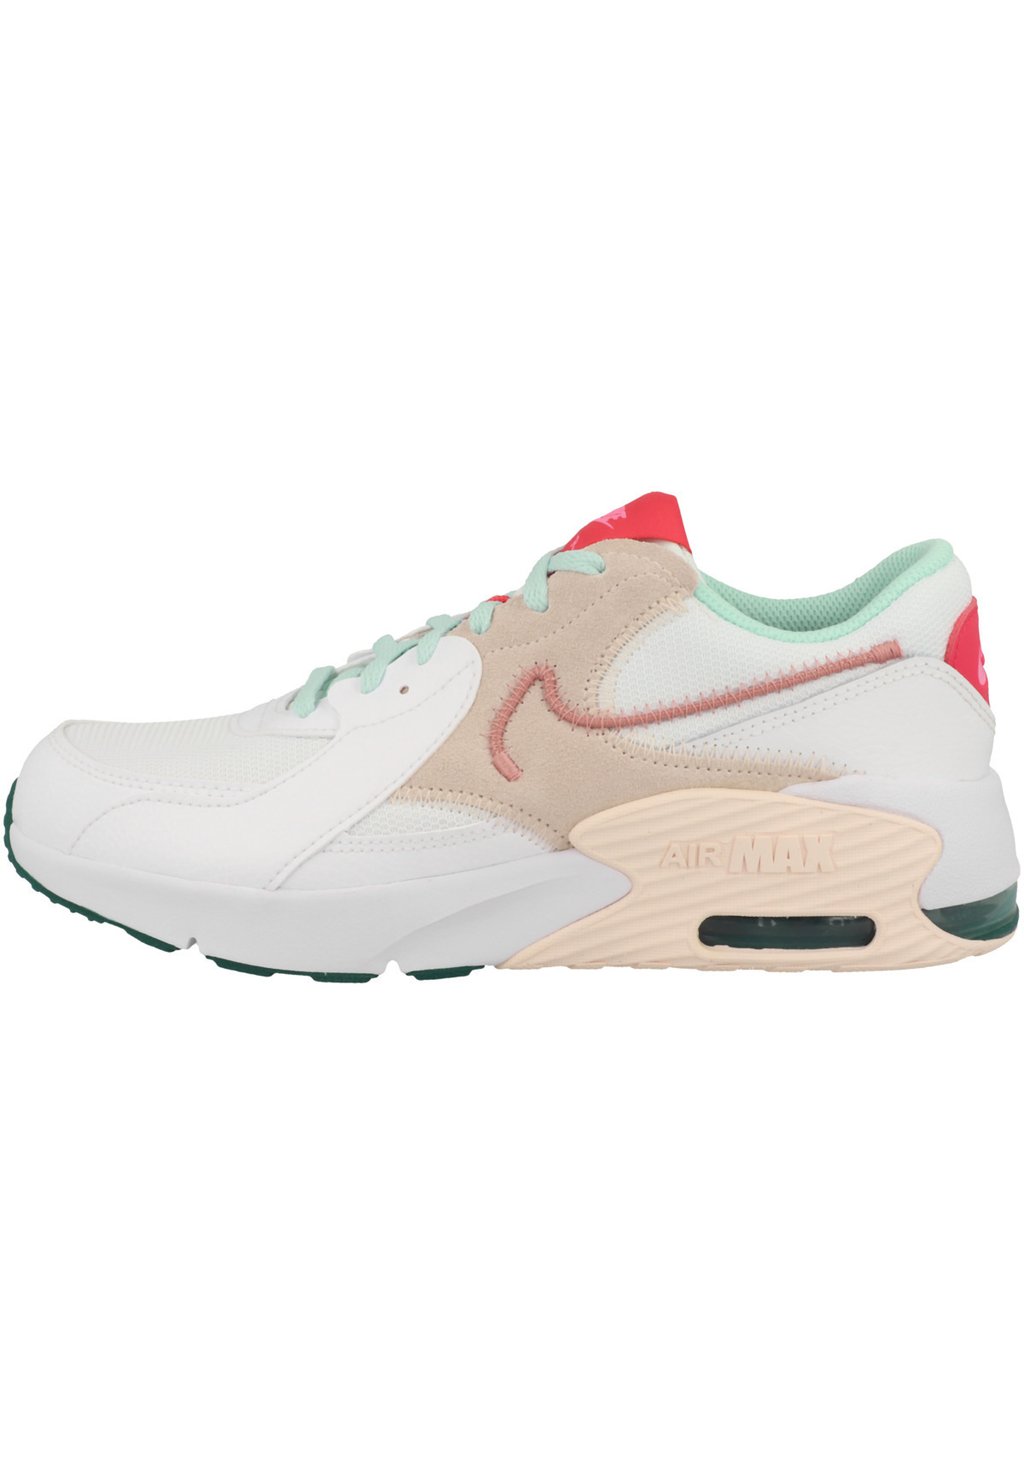 Низкие кроссовки Air Max Excee Gs Nike, цвет white red stardust guava ice s fb